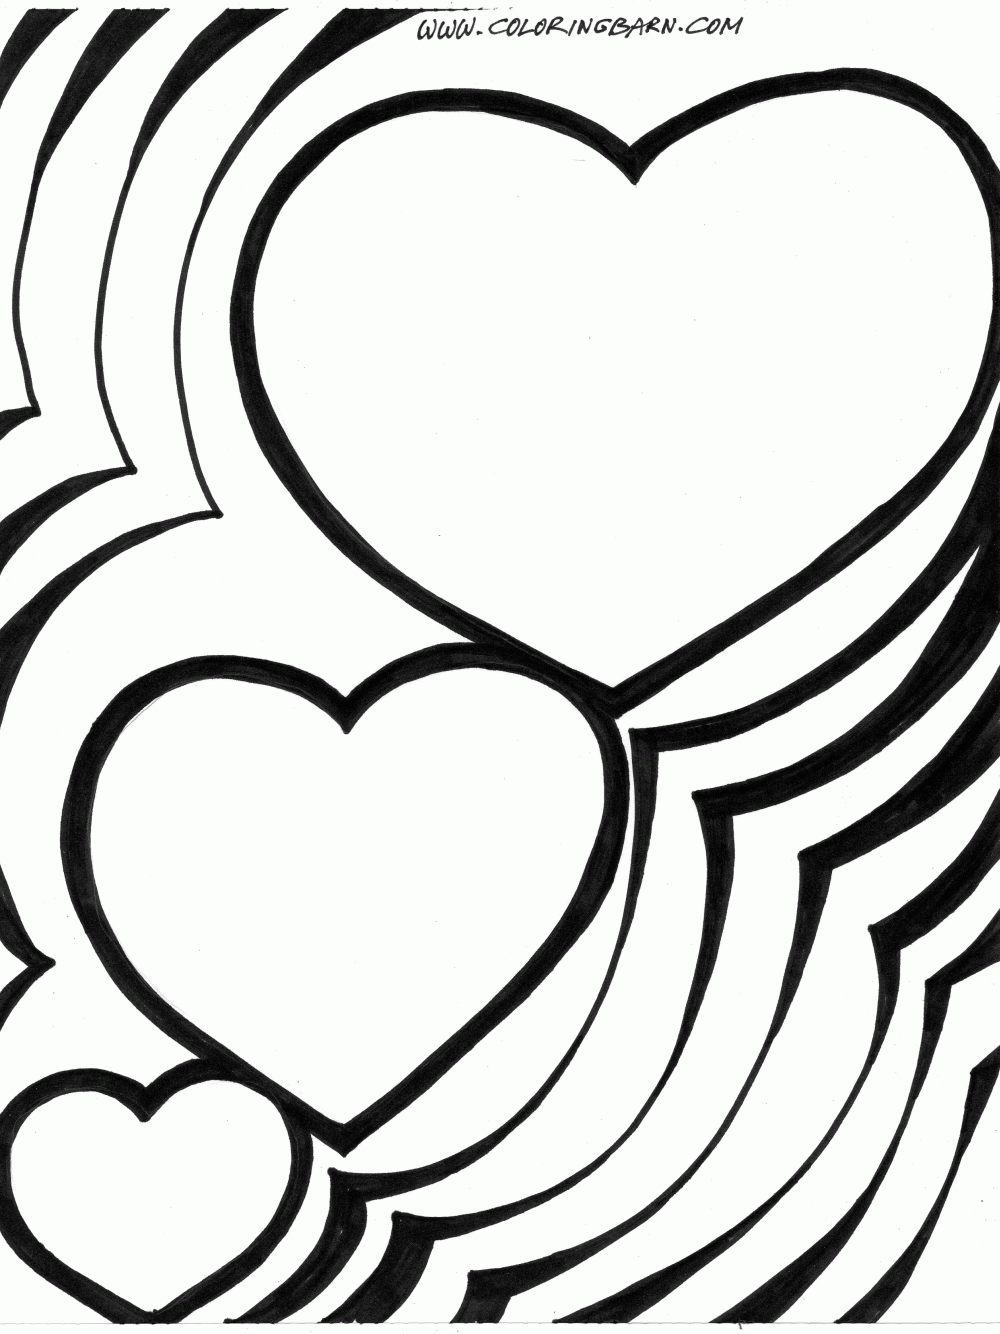 Free Flower And Hearts Coloring Pages, Download Free Flower And Hearts